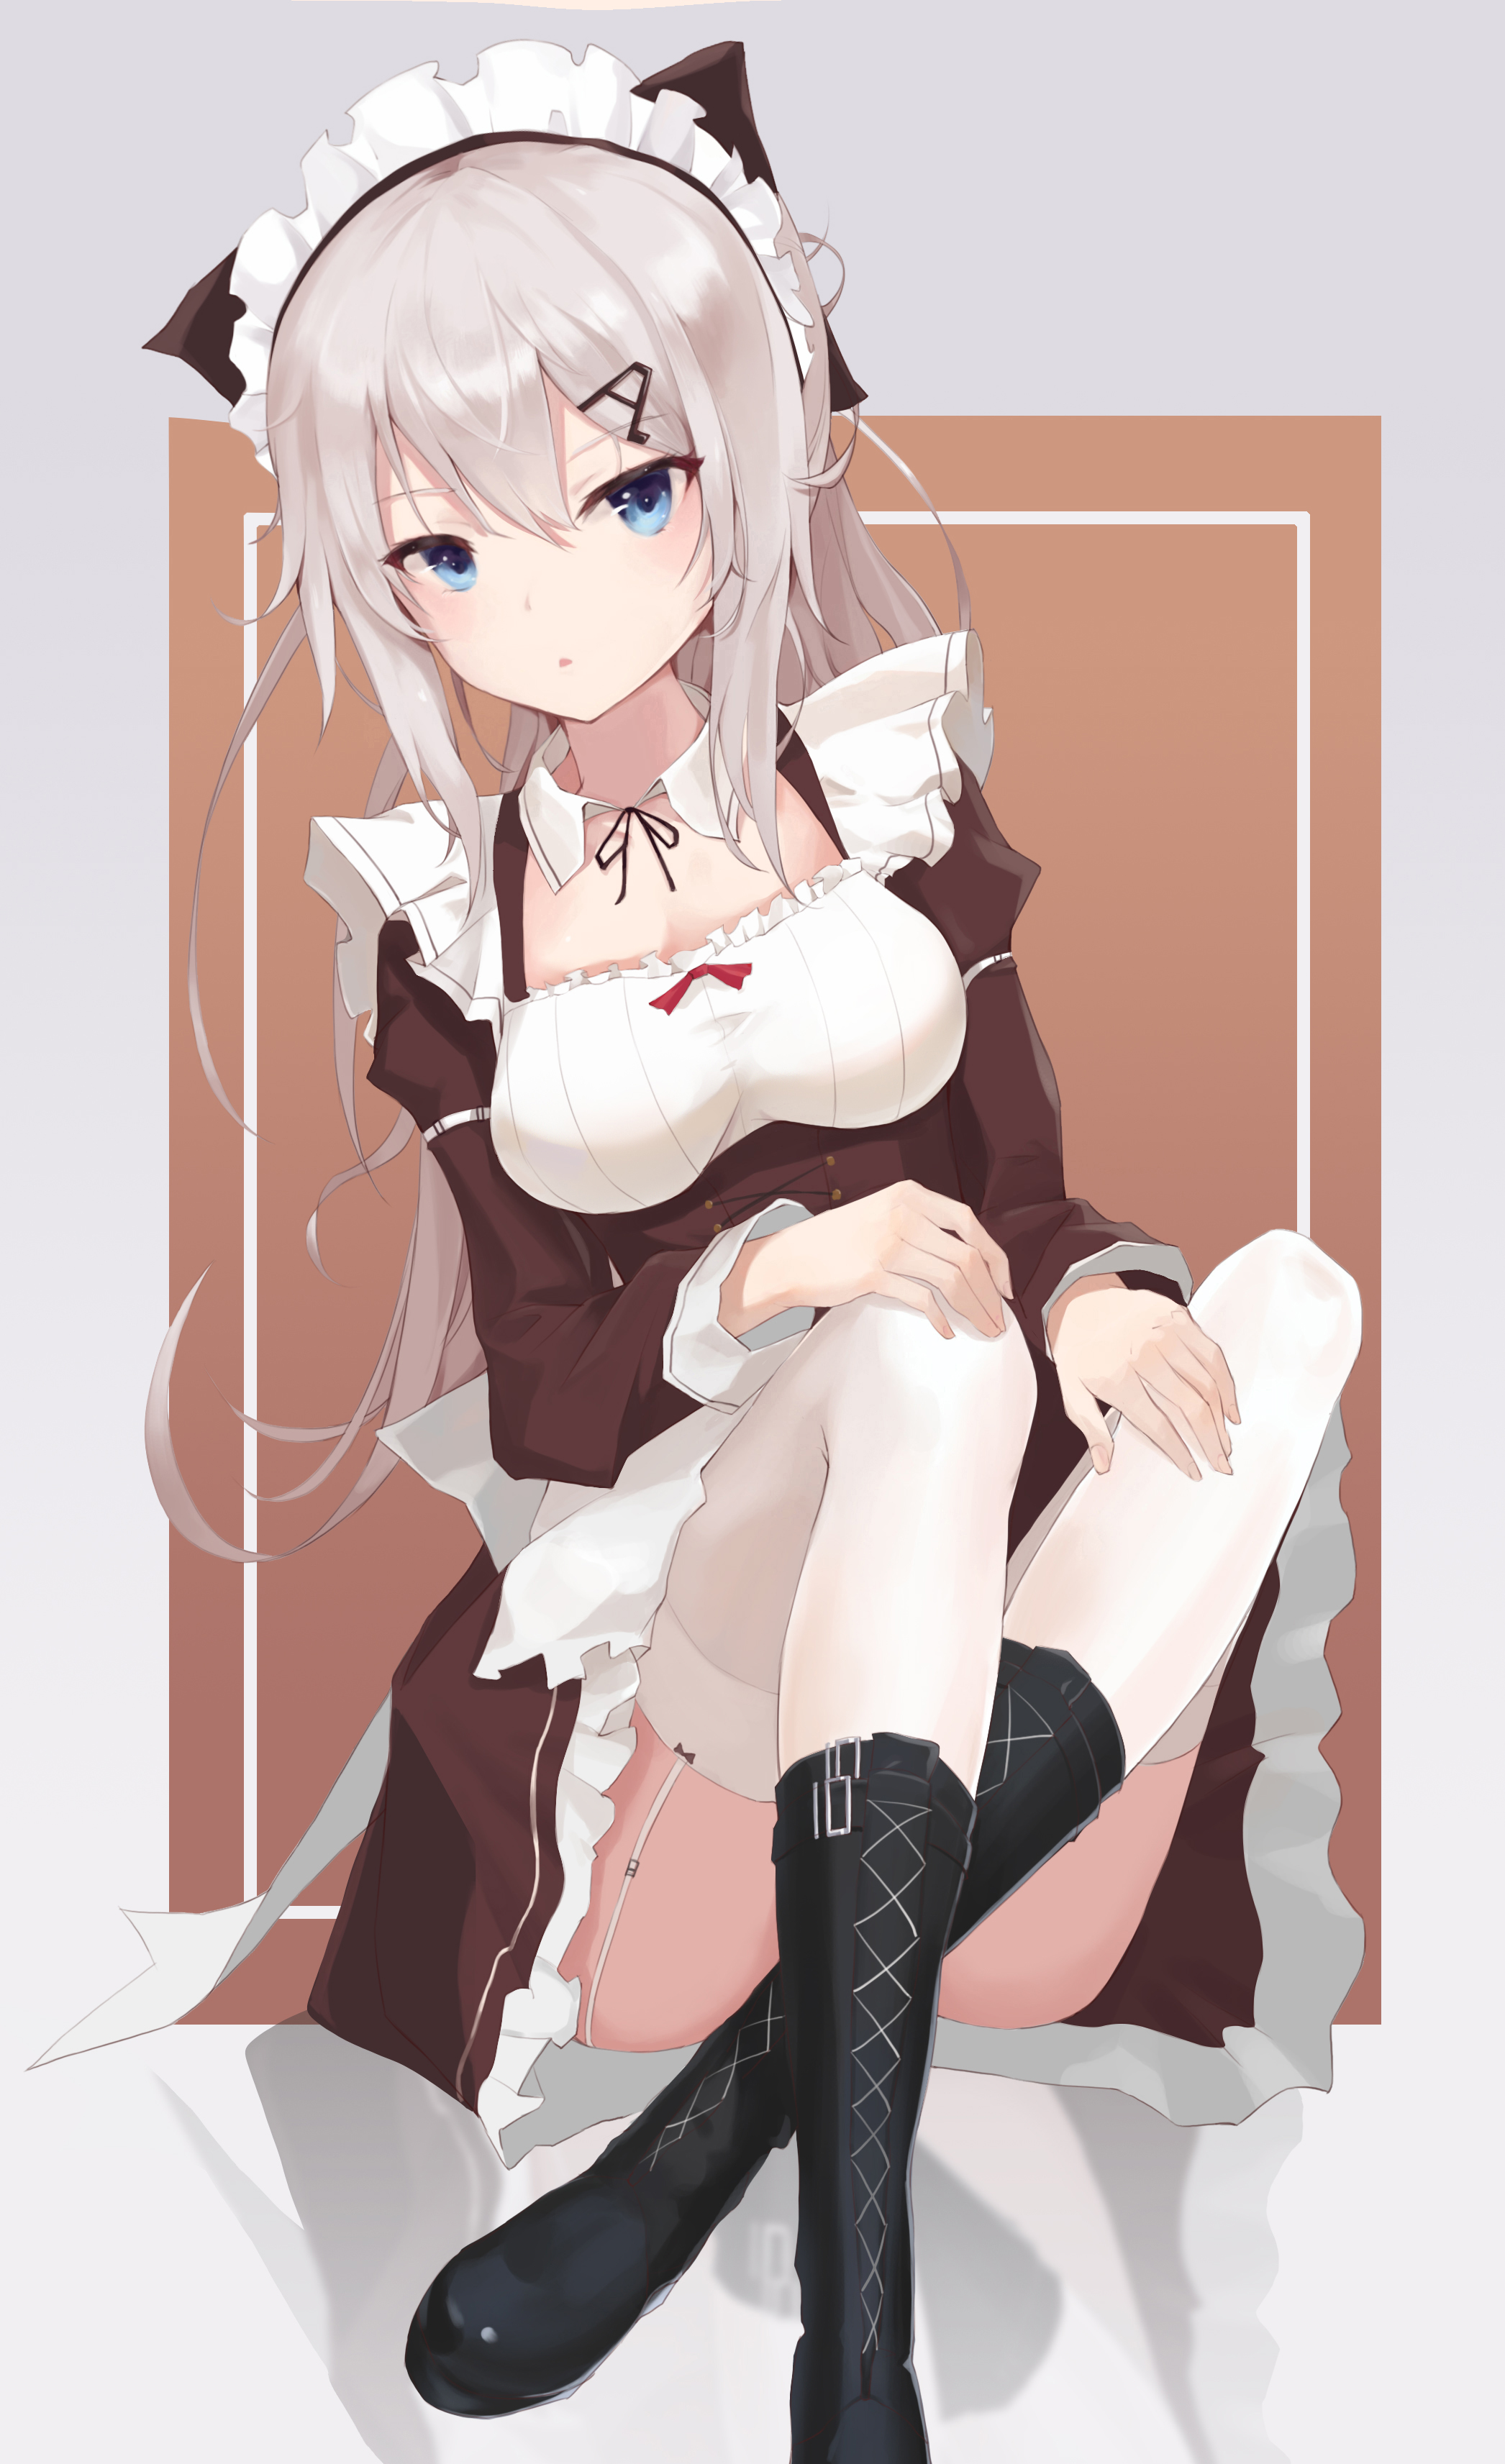 Anime 2092x3426 white background 9A-91 (Girls Frontline) heels maid maid outfit stockings thigh-highs silver hair headdress blue eyes legs crossed sitting Girls Frontline anime girls Serika